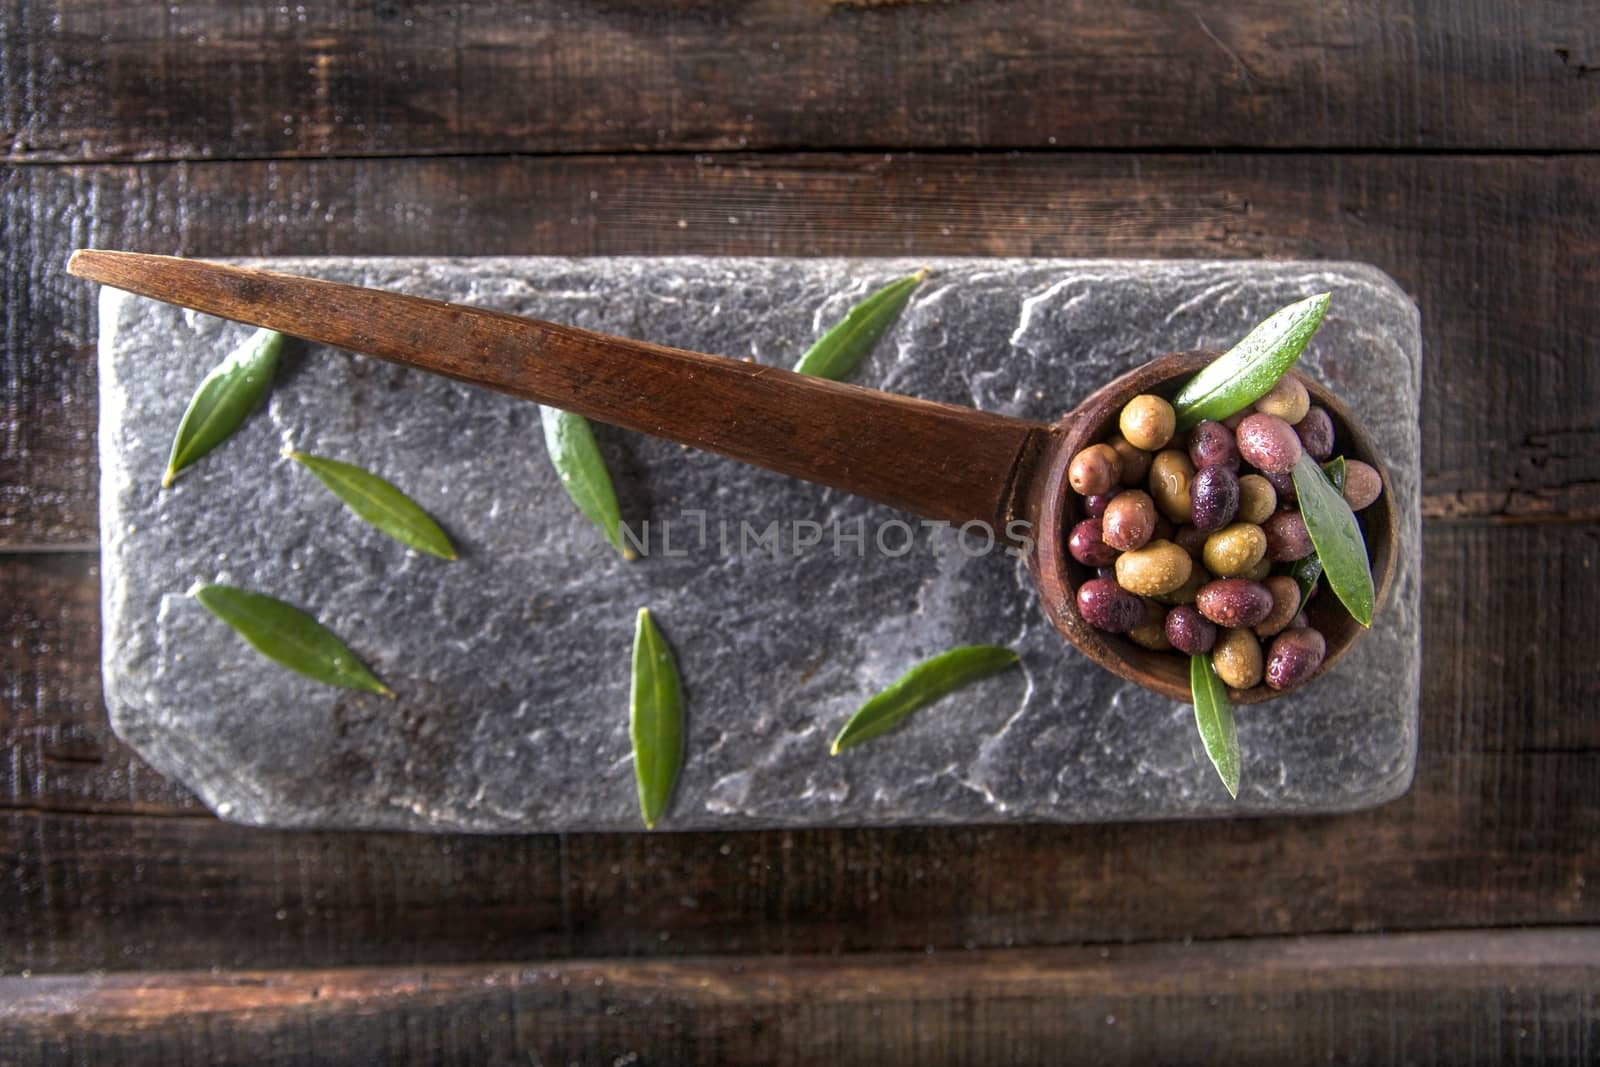 Mixed olives in brine by fotografiche.eu